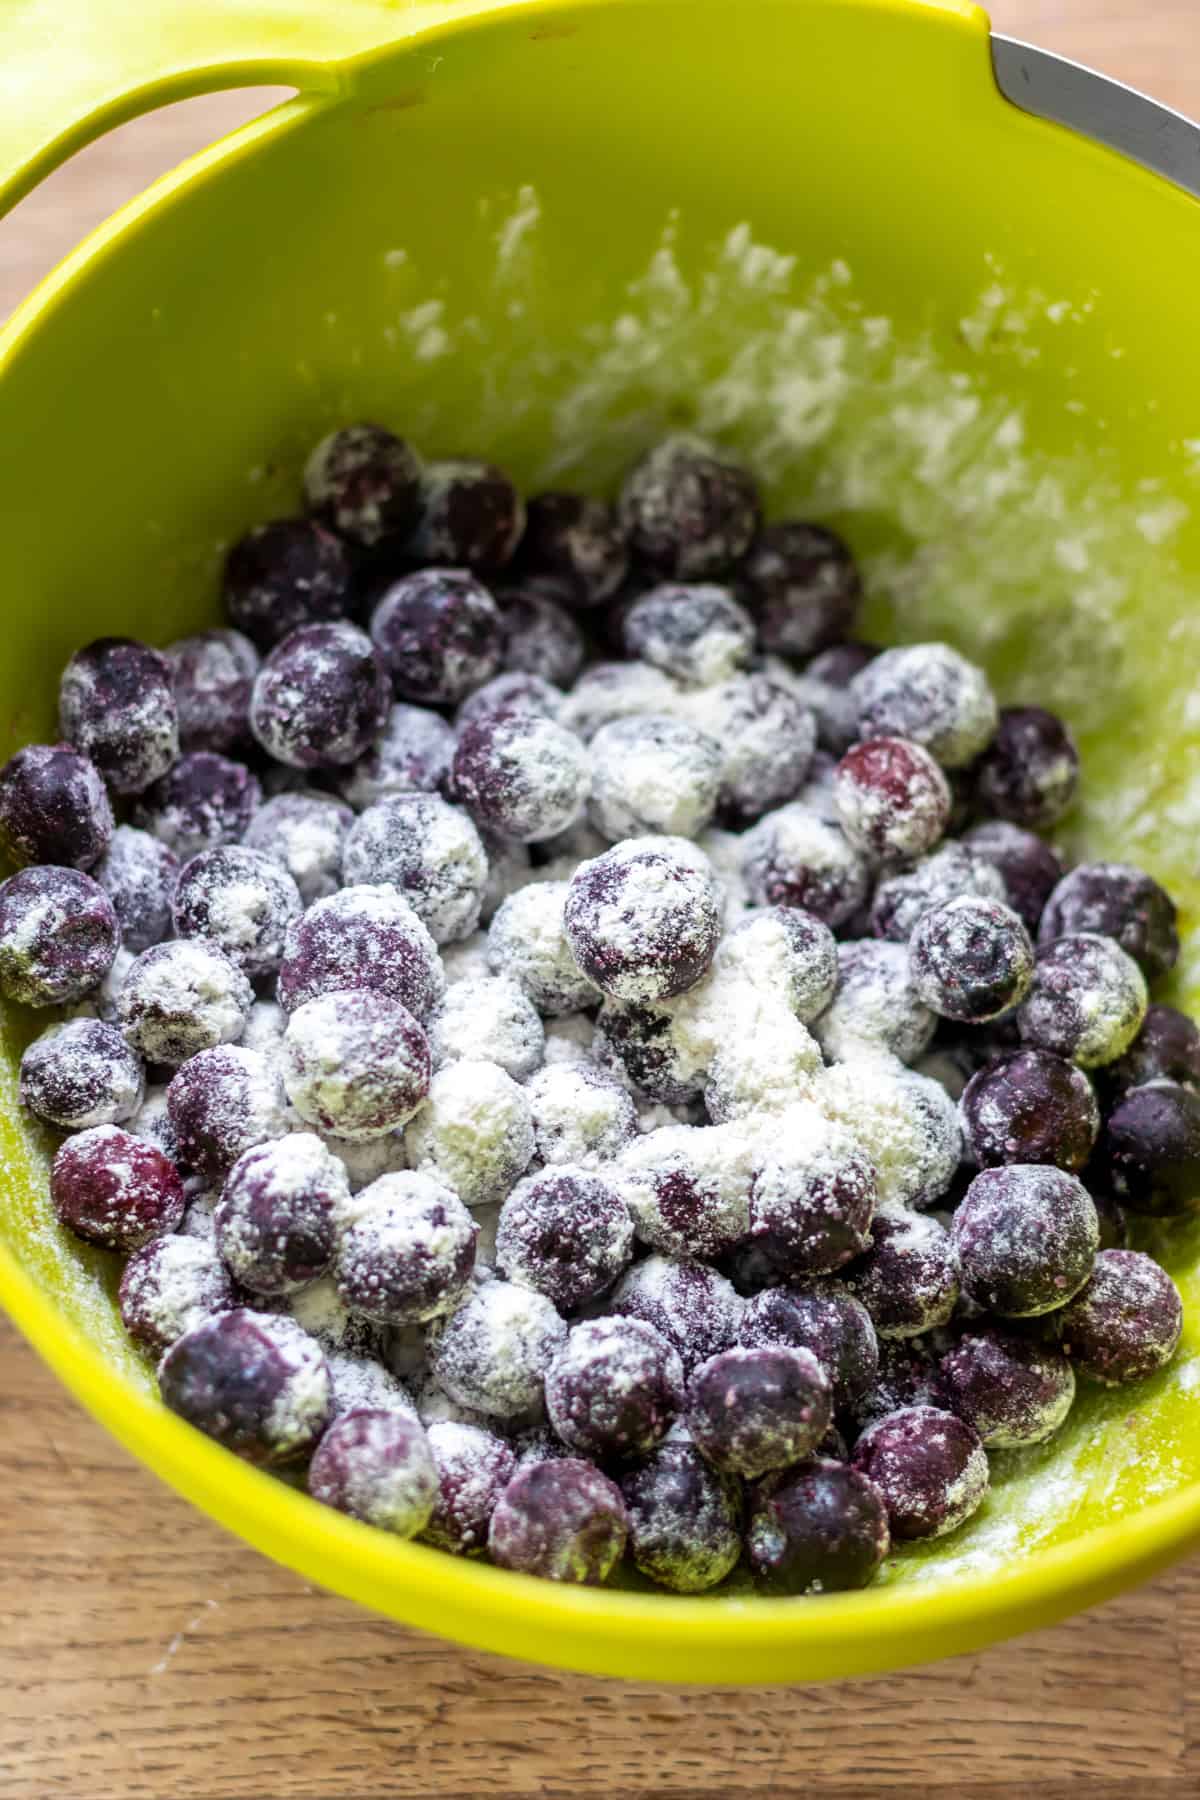 Tossing the blueberries in a little flour.